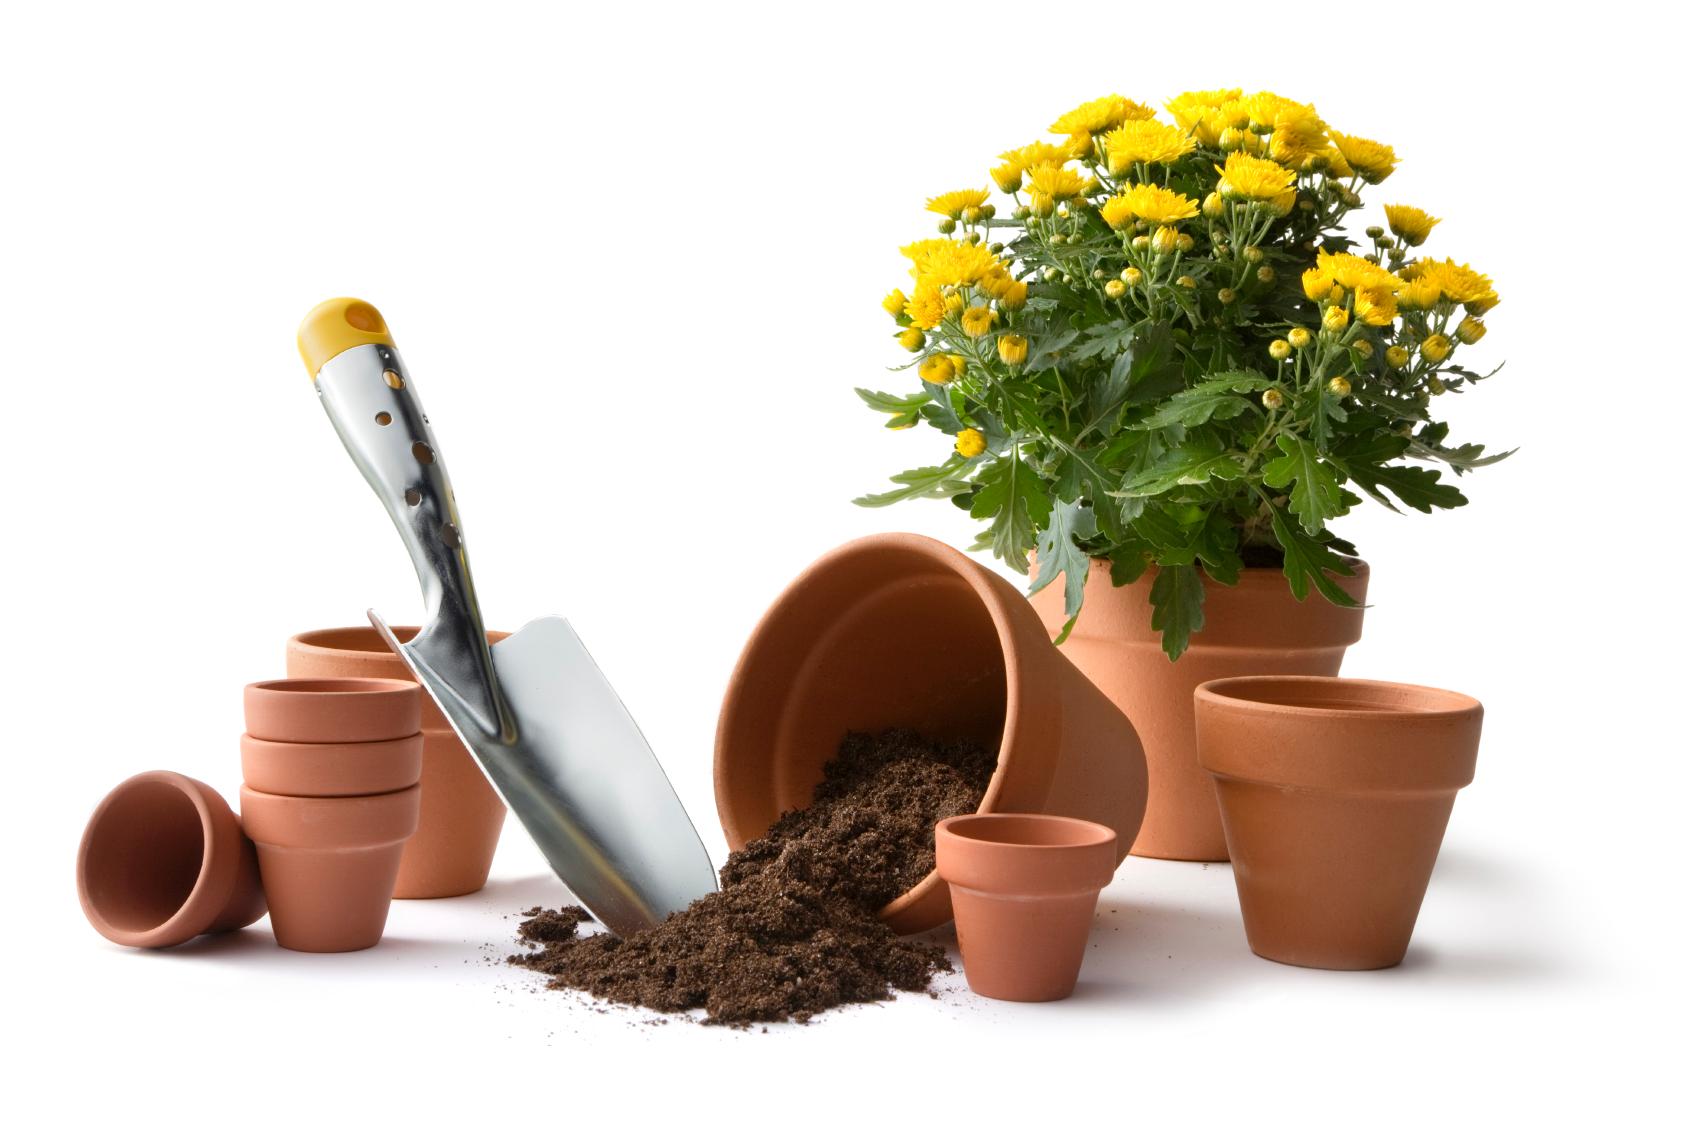 A cluster of clay plant pots (one containing yellow flowers), a spade and some potting soil.